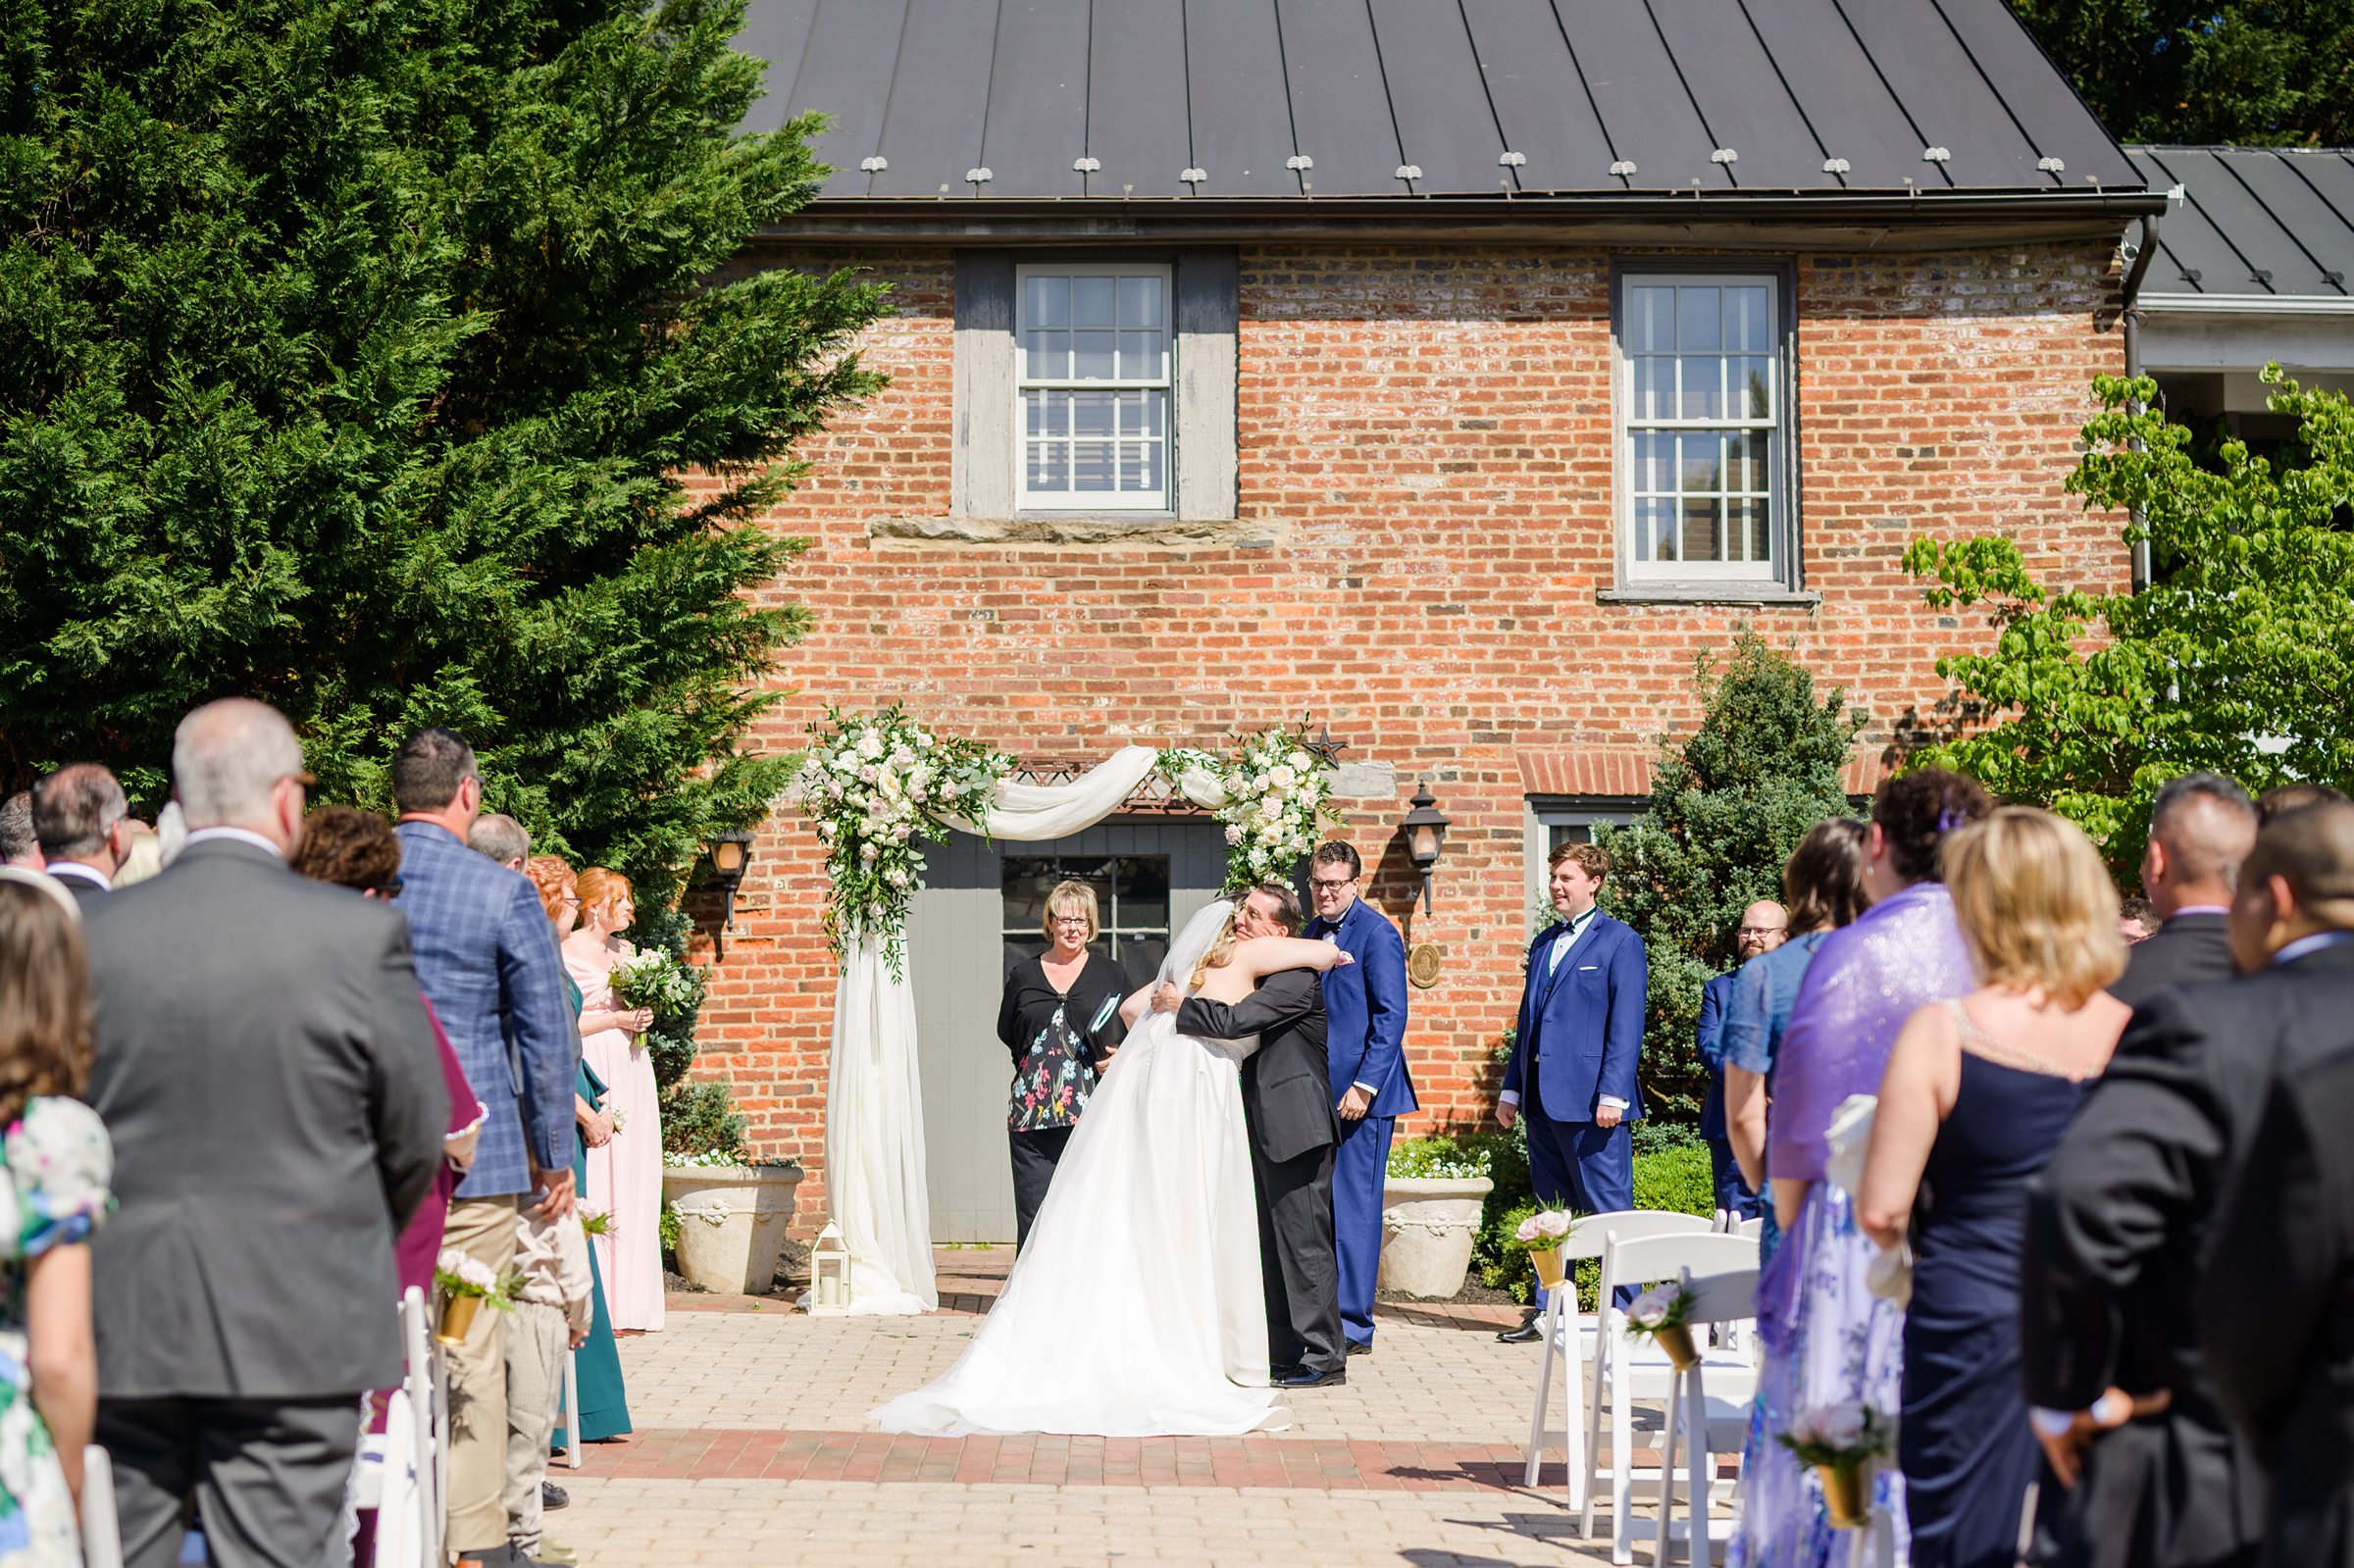 Blush and White Spring Wedding Day at Birkby House in Leesburg, Virginia Photographed by Baltimore Wedding Photographer Cait Kramer Photography